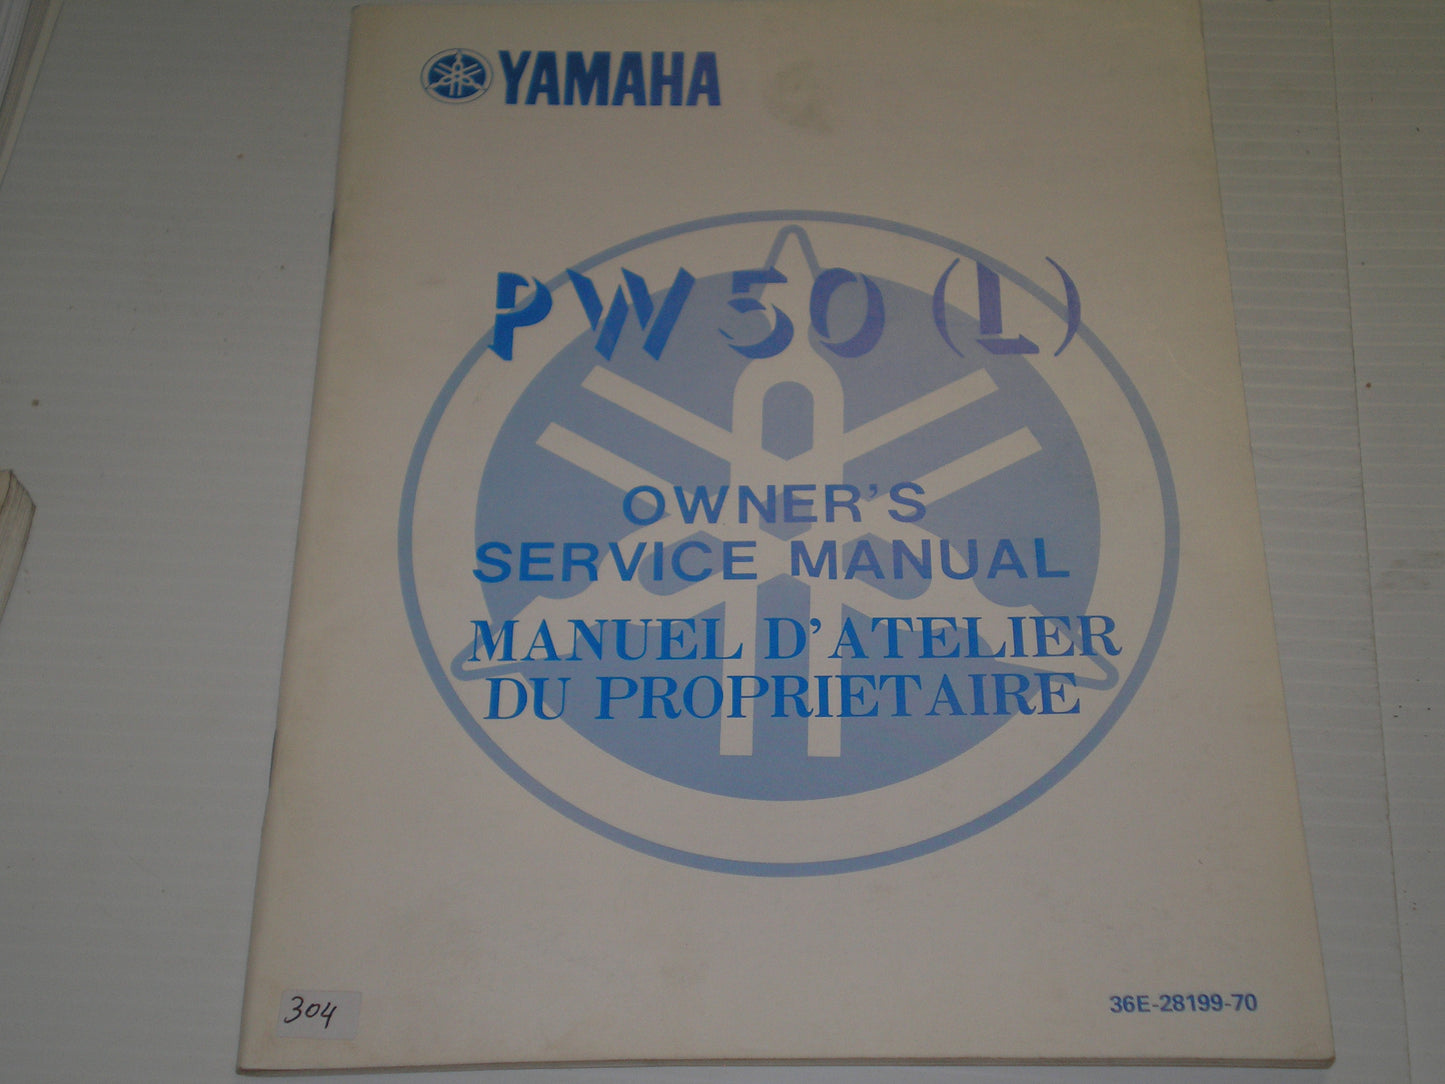 YAMAHA PW50 L 1984  Owner's Service Manual  36E-28199-70  #304